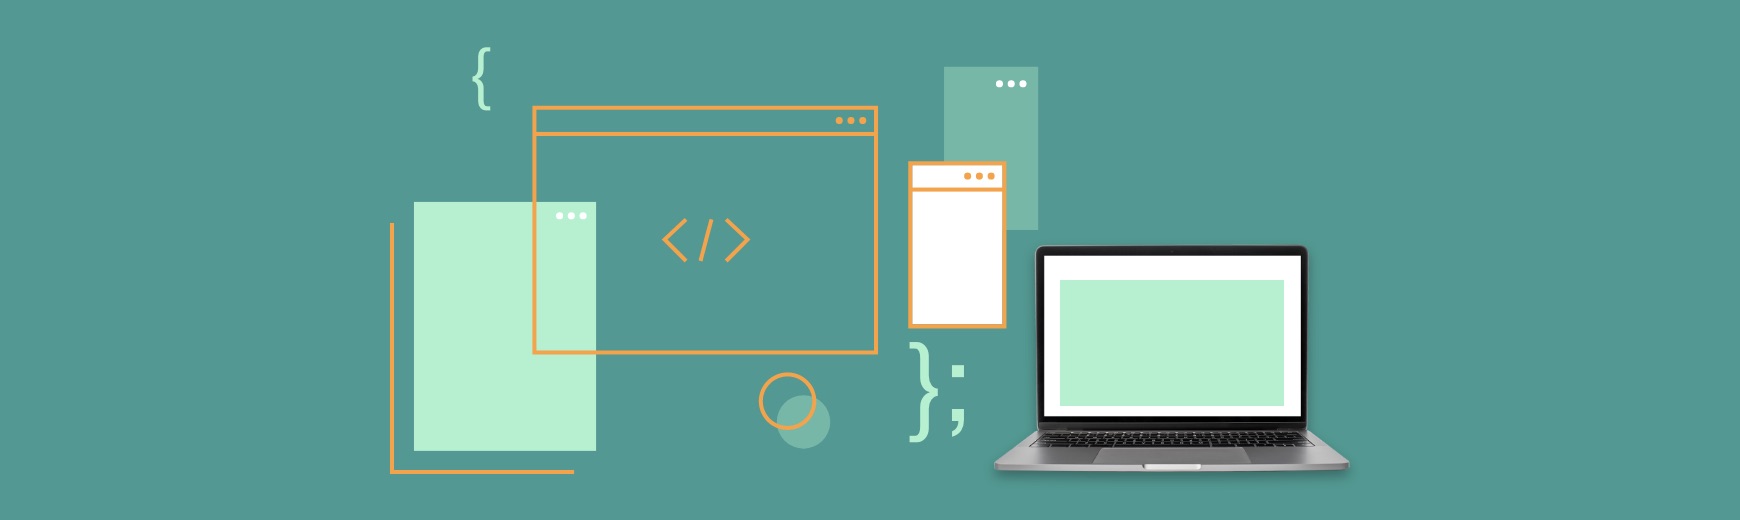 Illustration of laptop, code, and screens